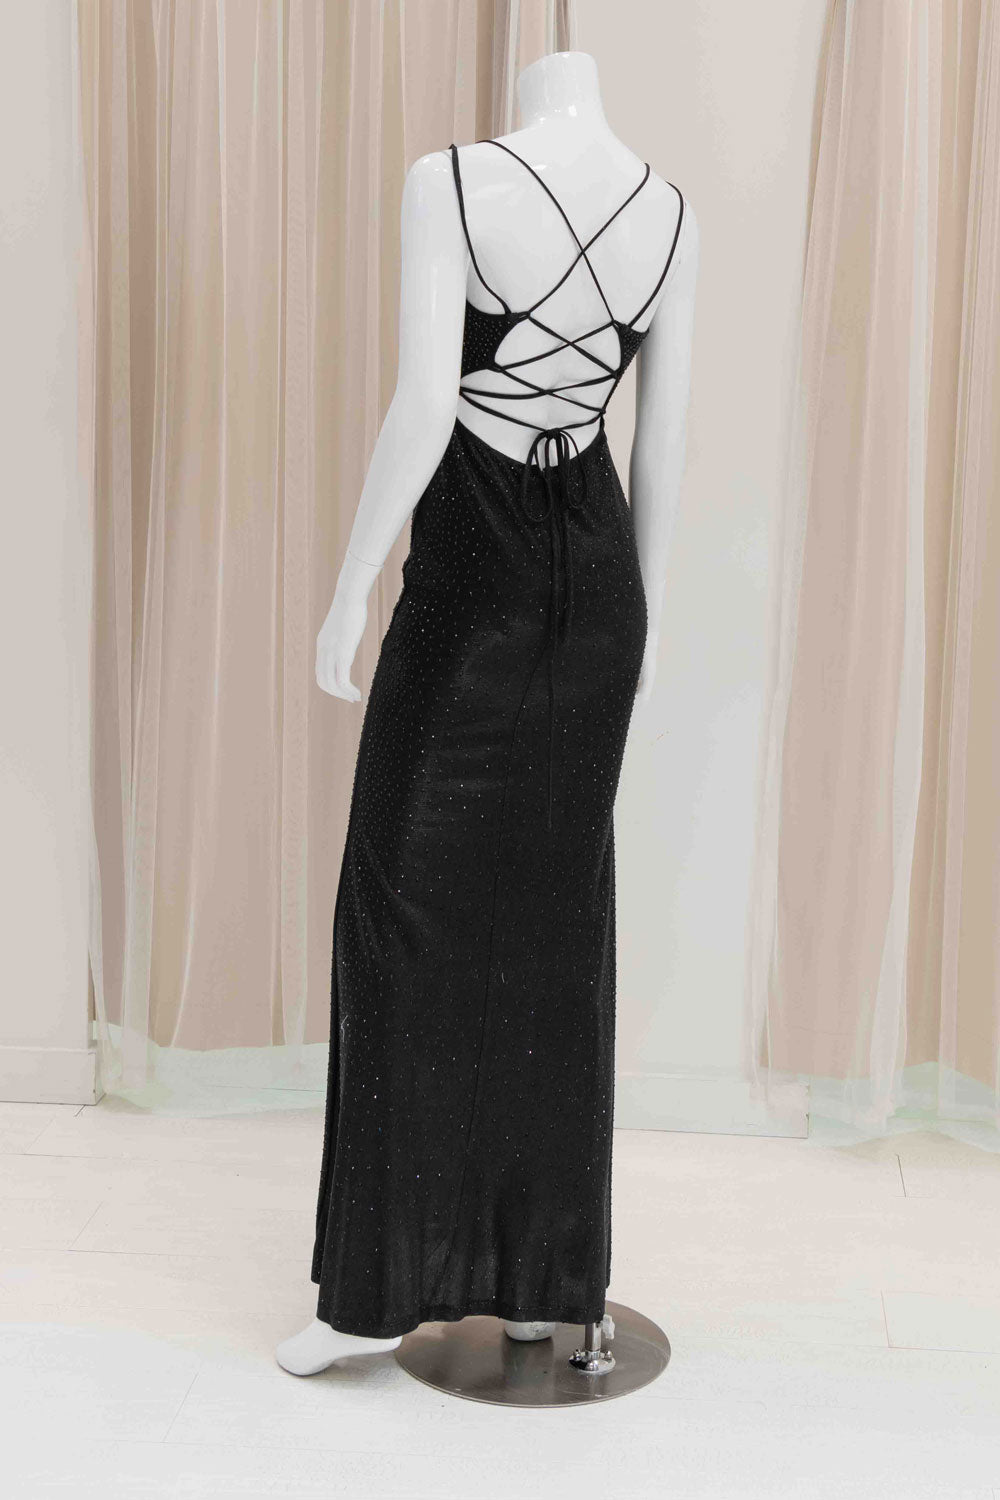 Simple Semi-Formal Evening Gown in Black